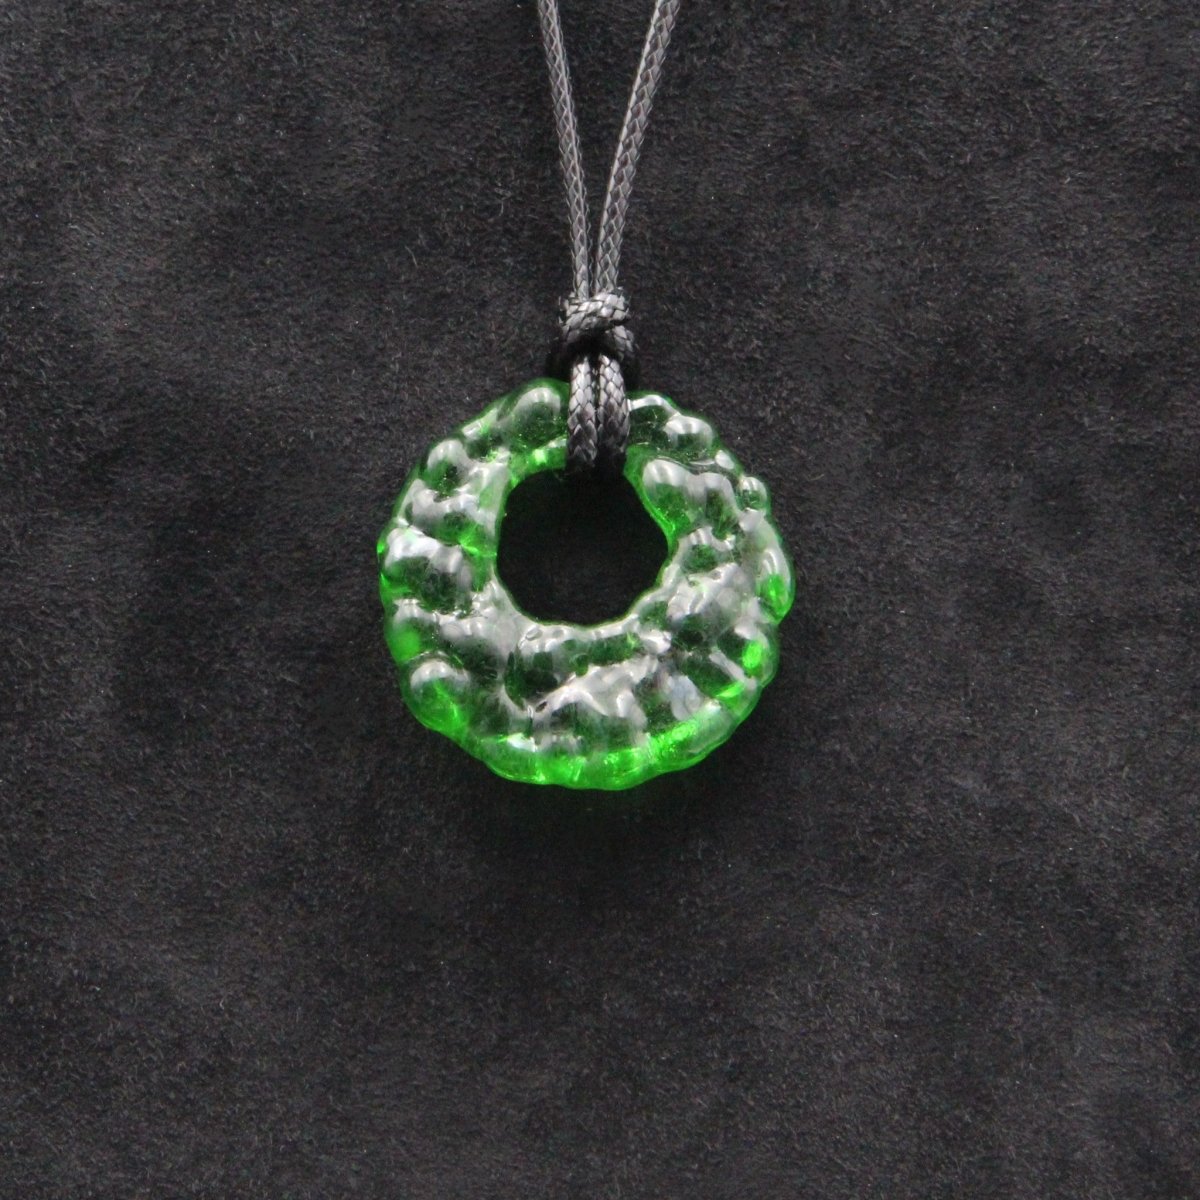 Upcycled Green Donut Necklace, Recycled Glass Pendant